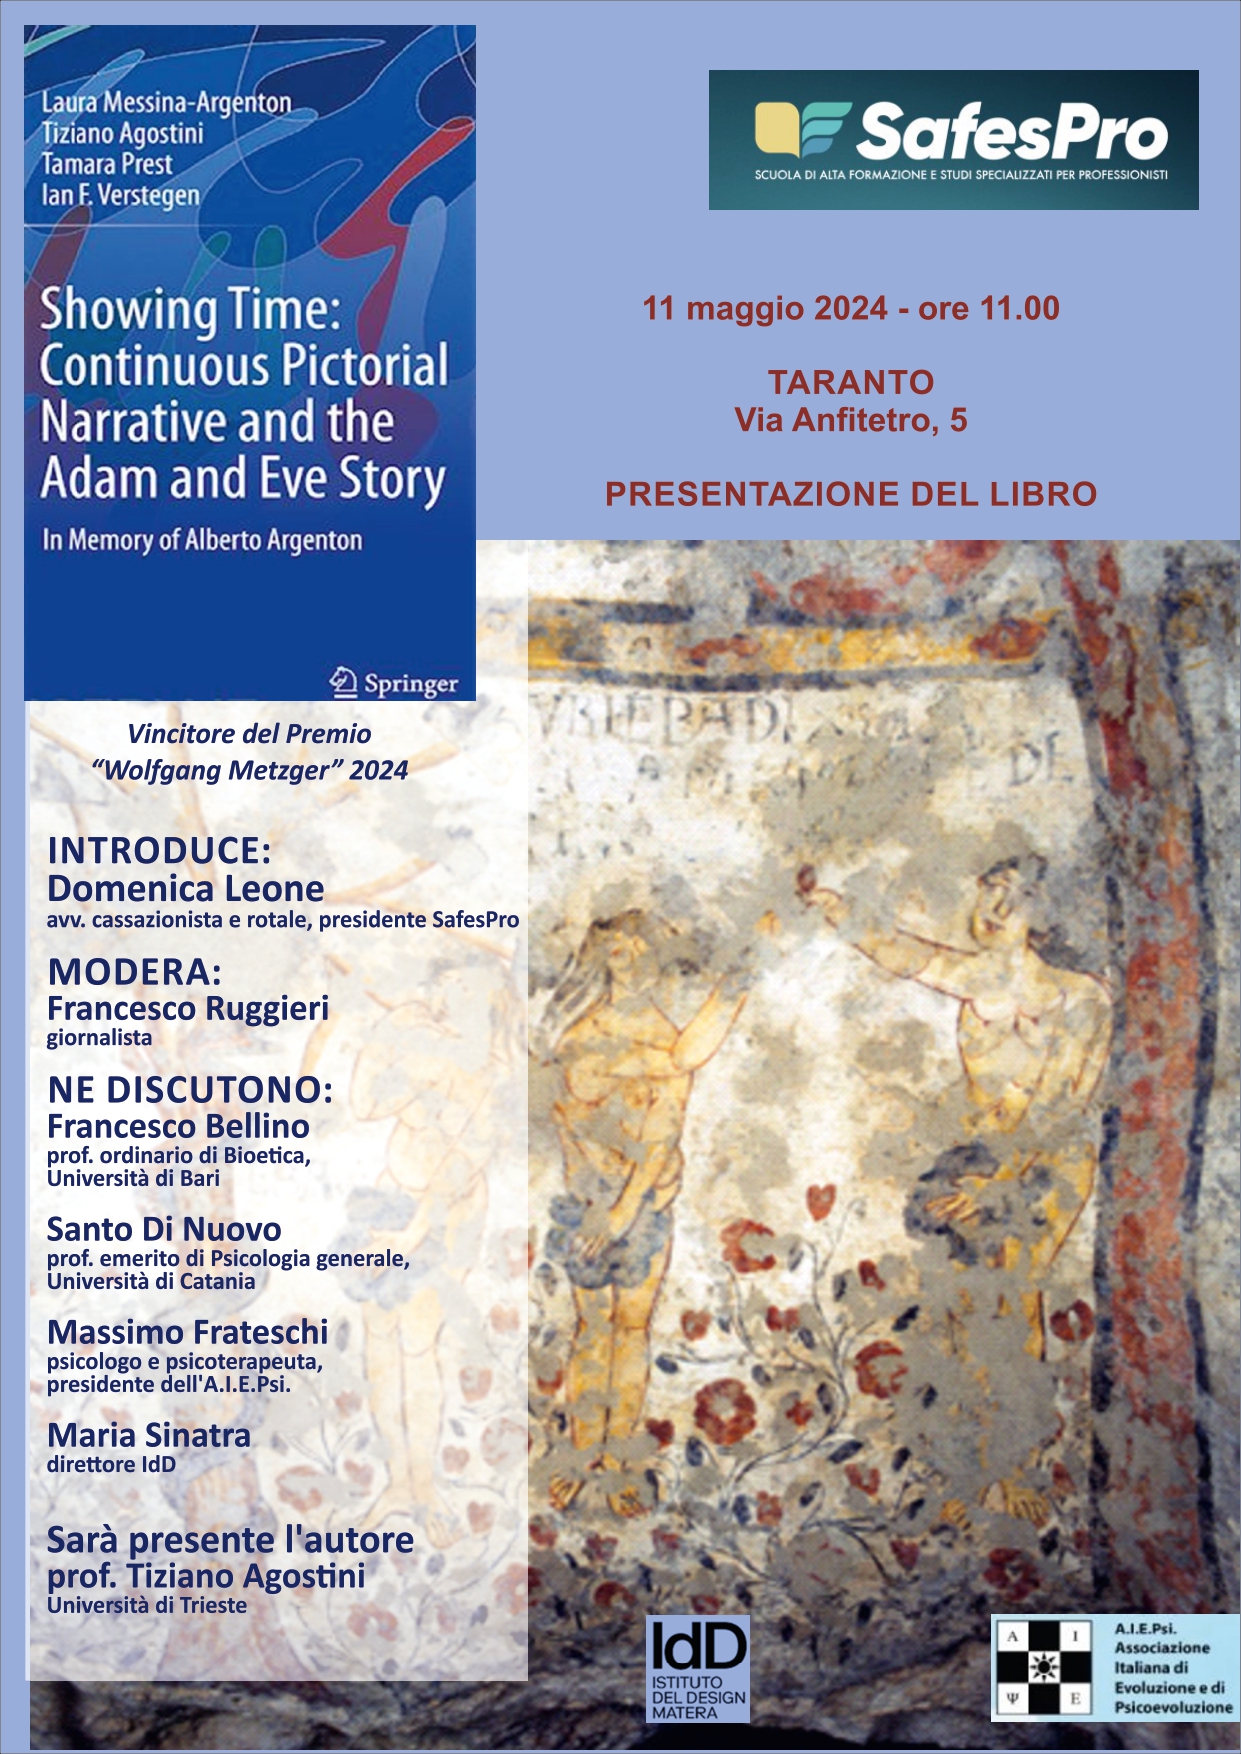 Taranto, “Showing time: continuous pictorial narrative and the Adam and Eve story” Sabato presentazione